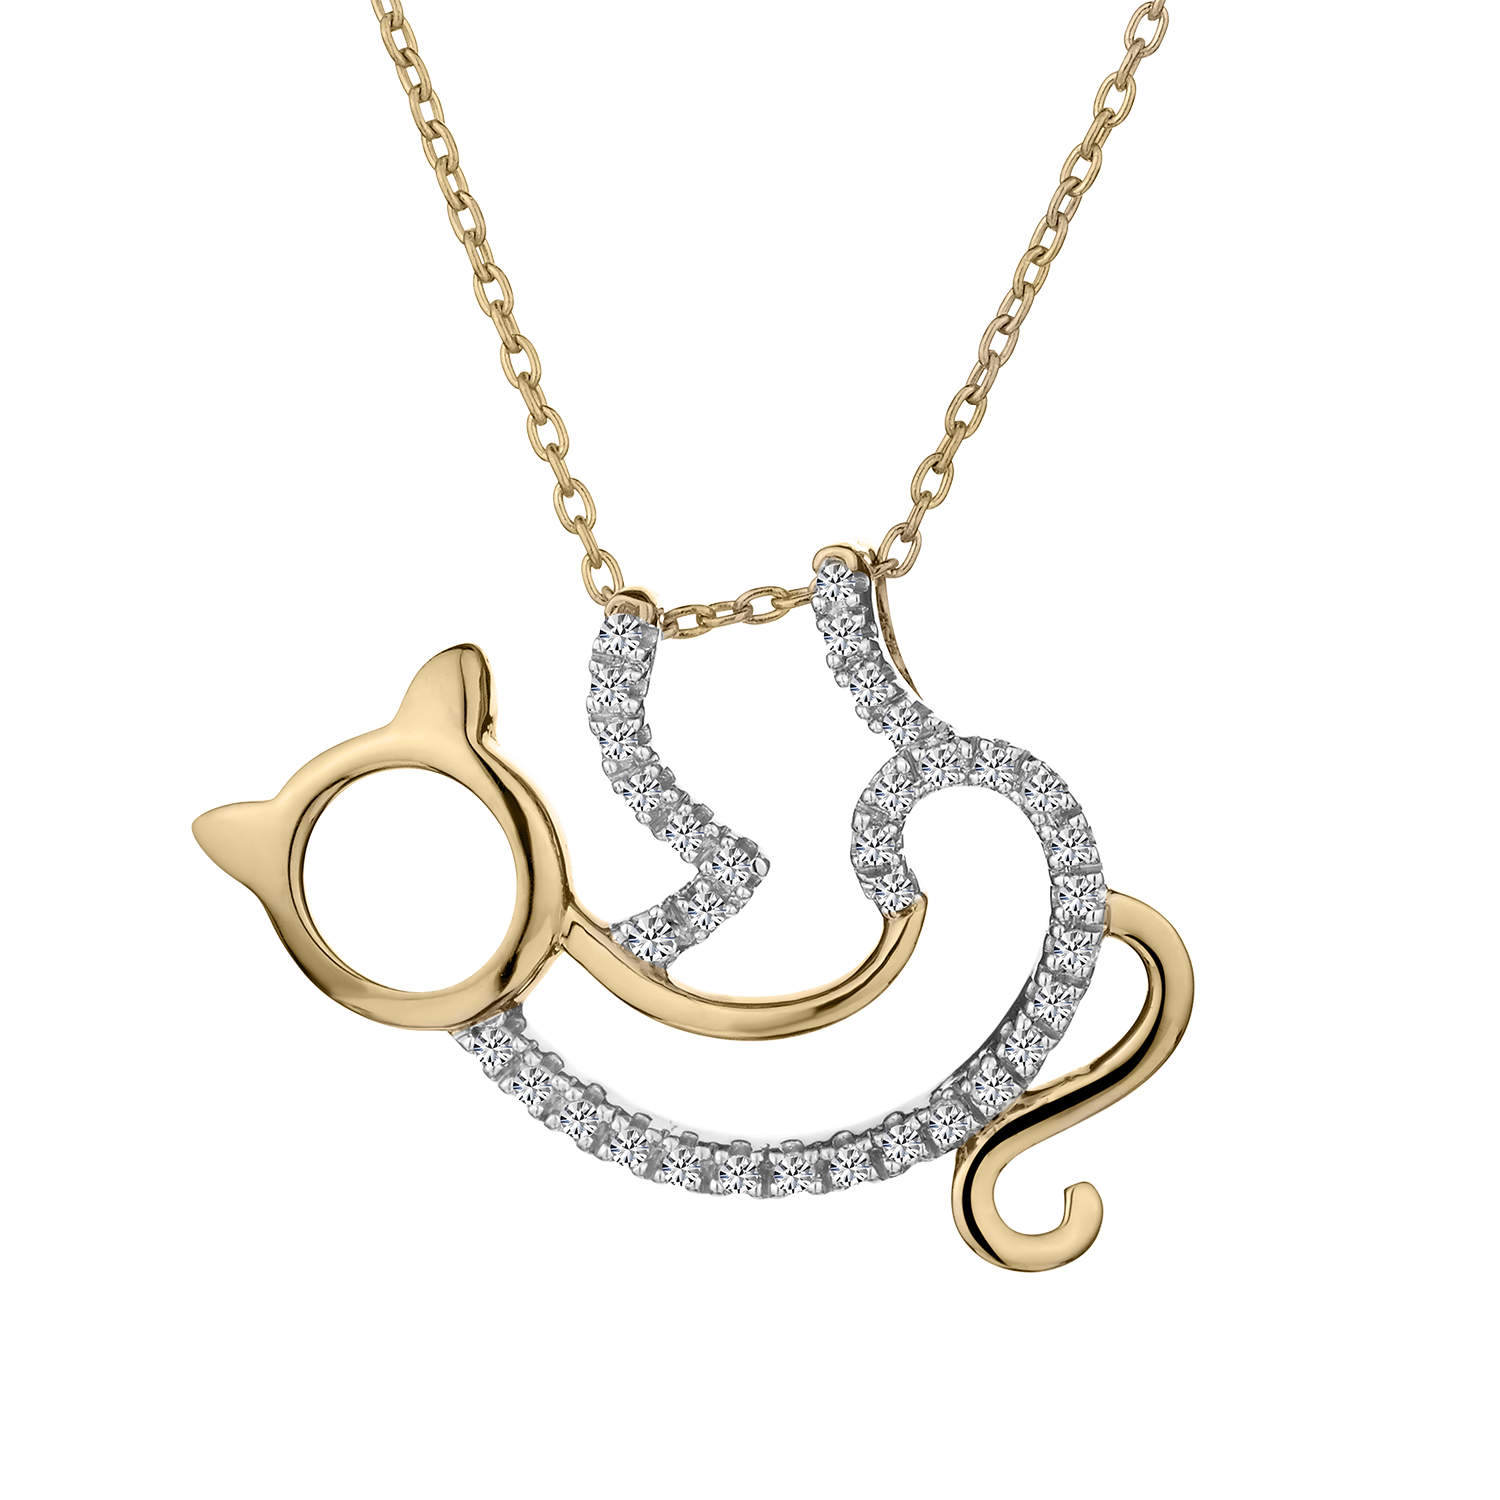 .10 Carat Diamond "Playful Cat",  10kt Yellow Gold. Necklaces and Pendants. Griffin Jewellery Designs.